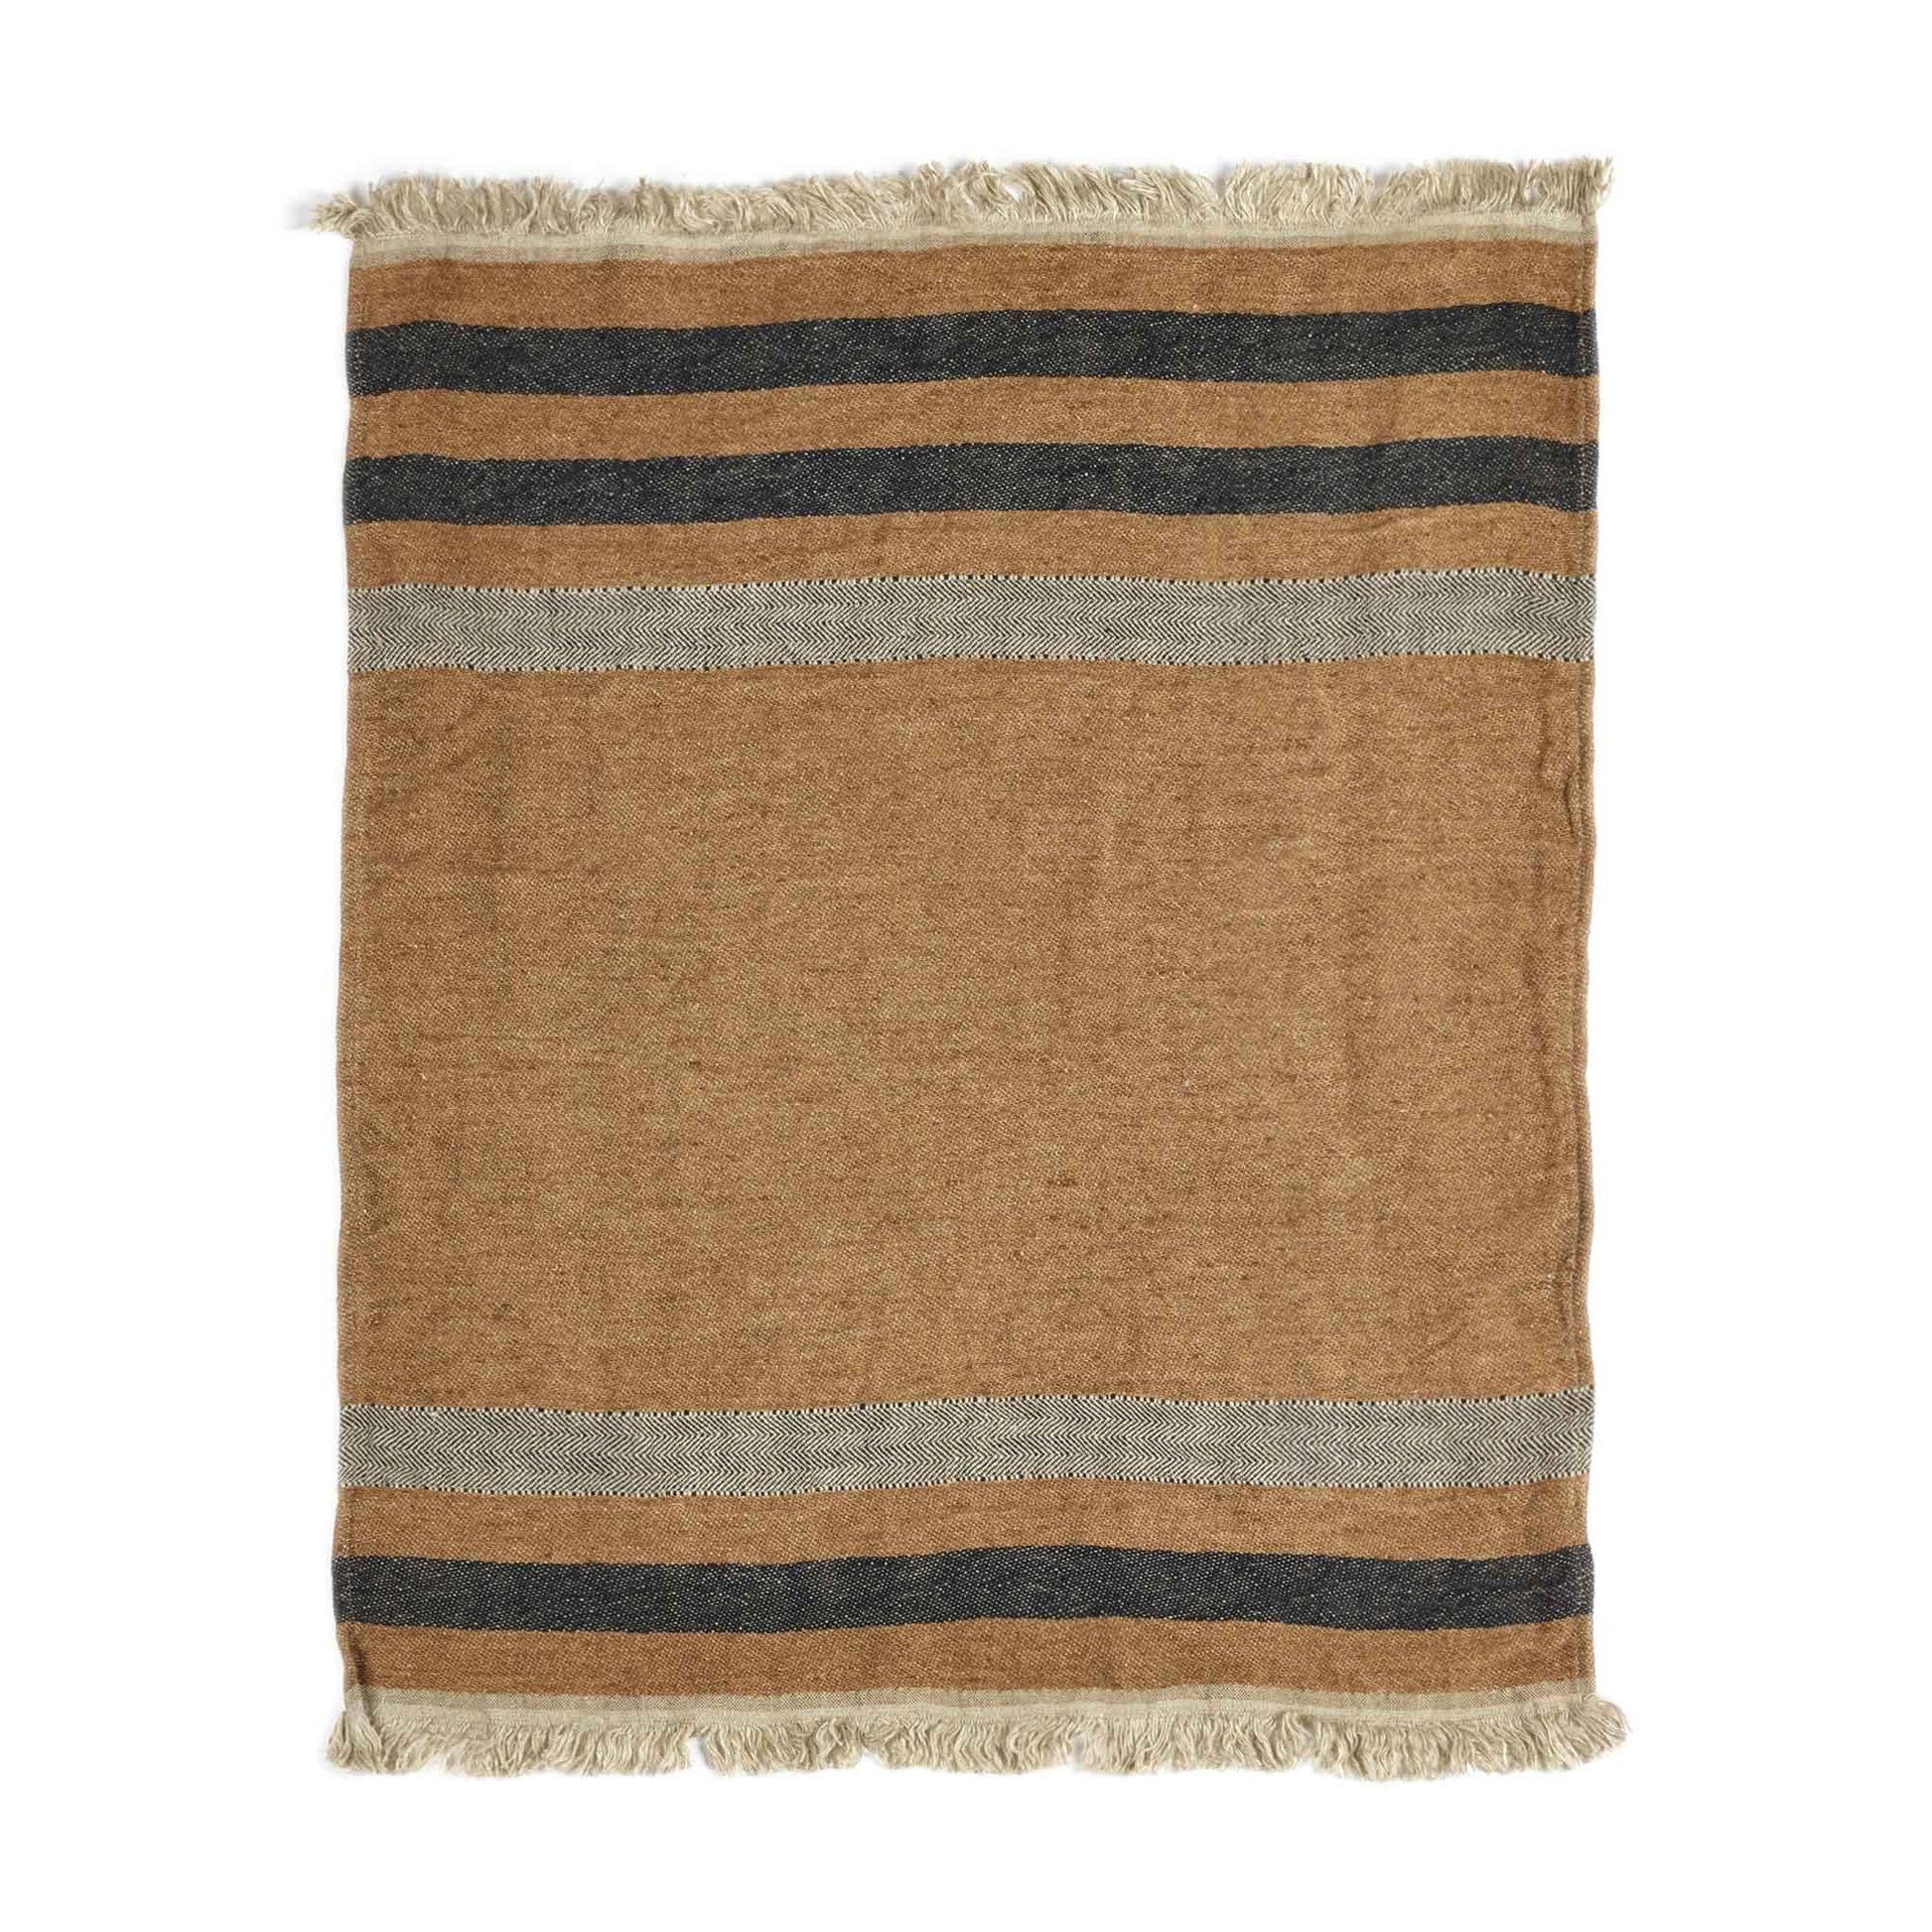 Belgian linen fouta throw blanket flat lay product shot in color Nairobi by Libeco for South Hous.